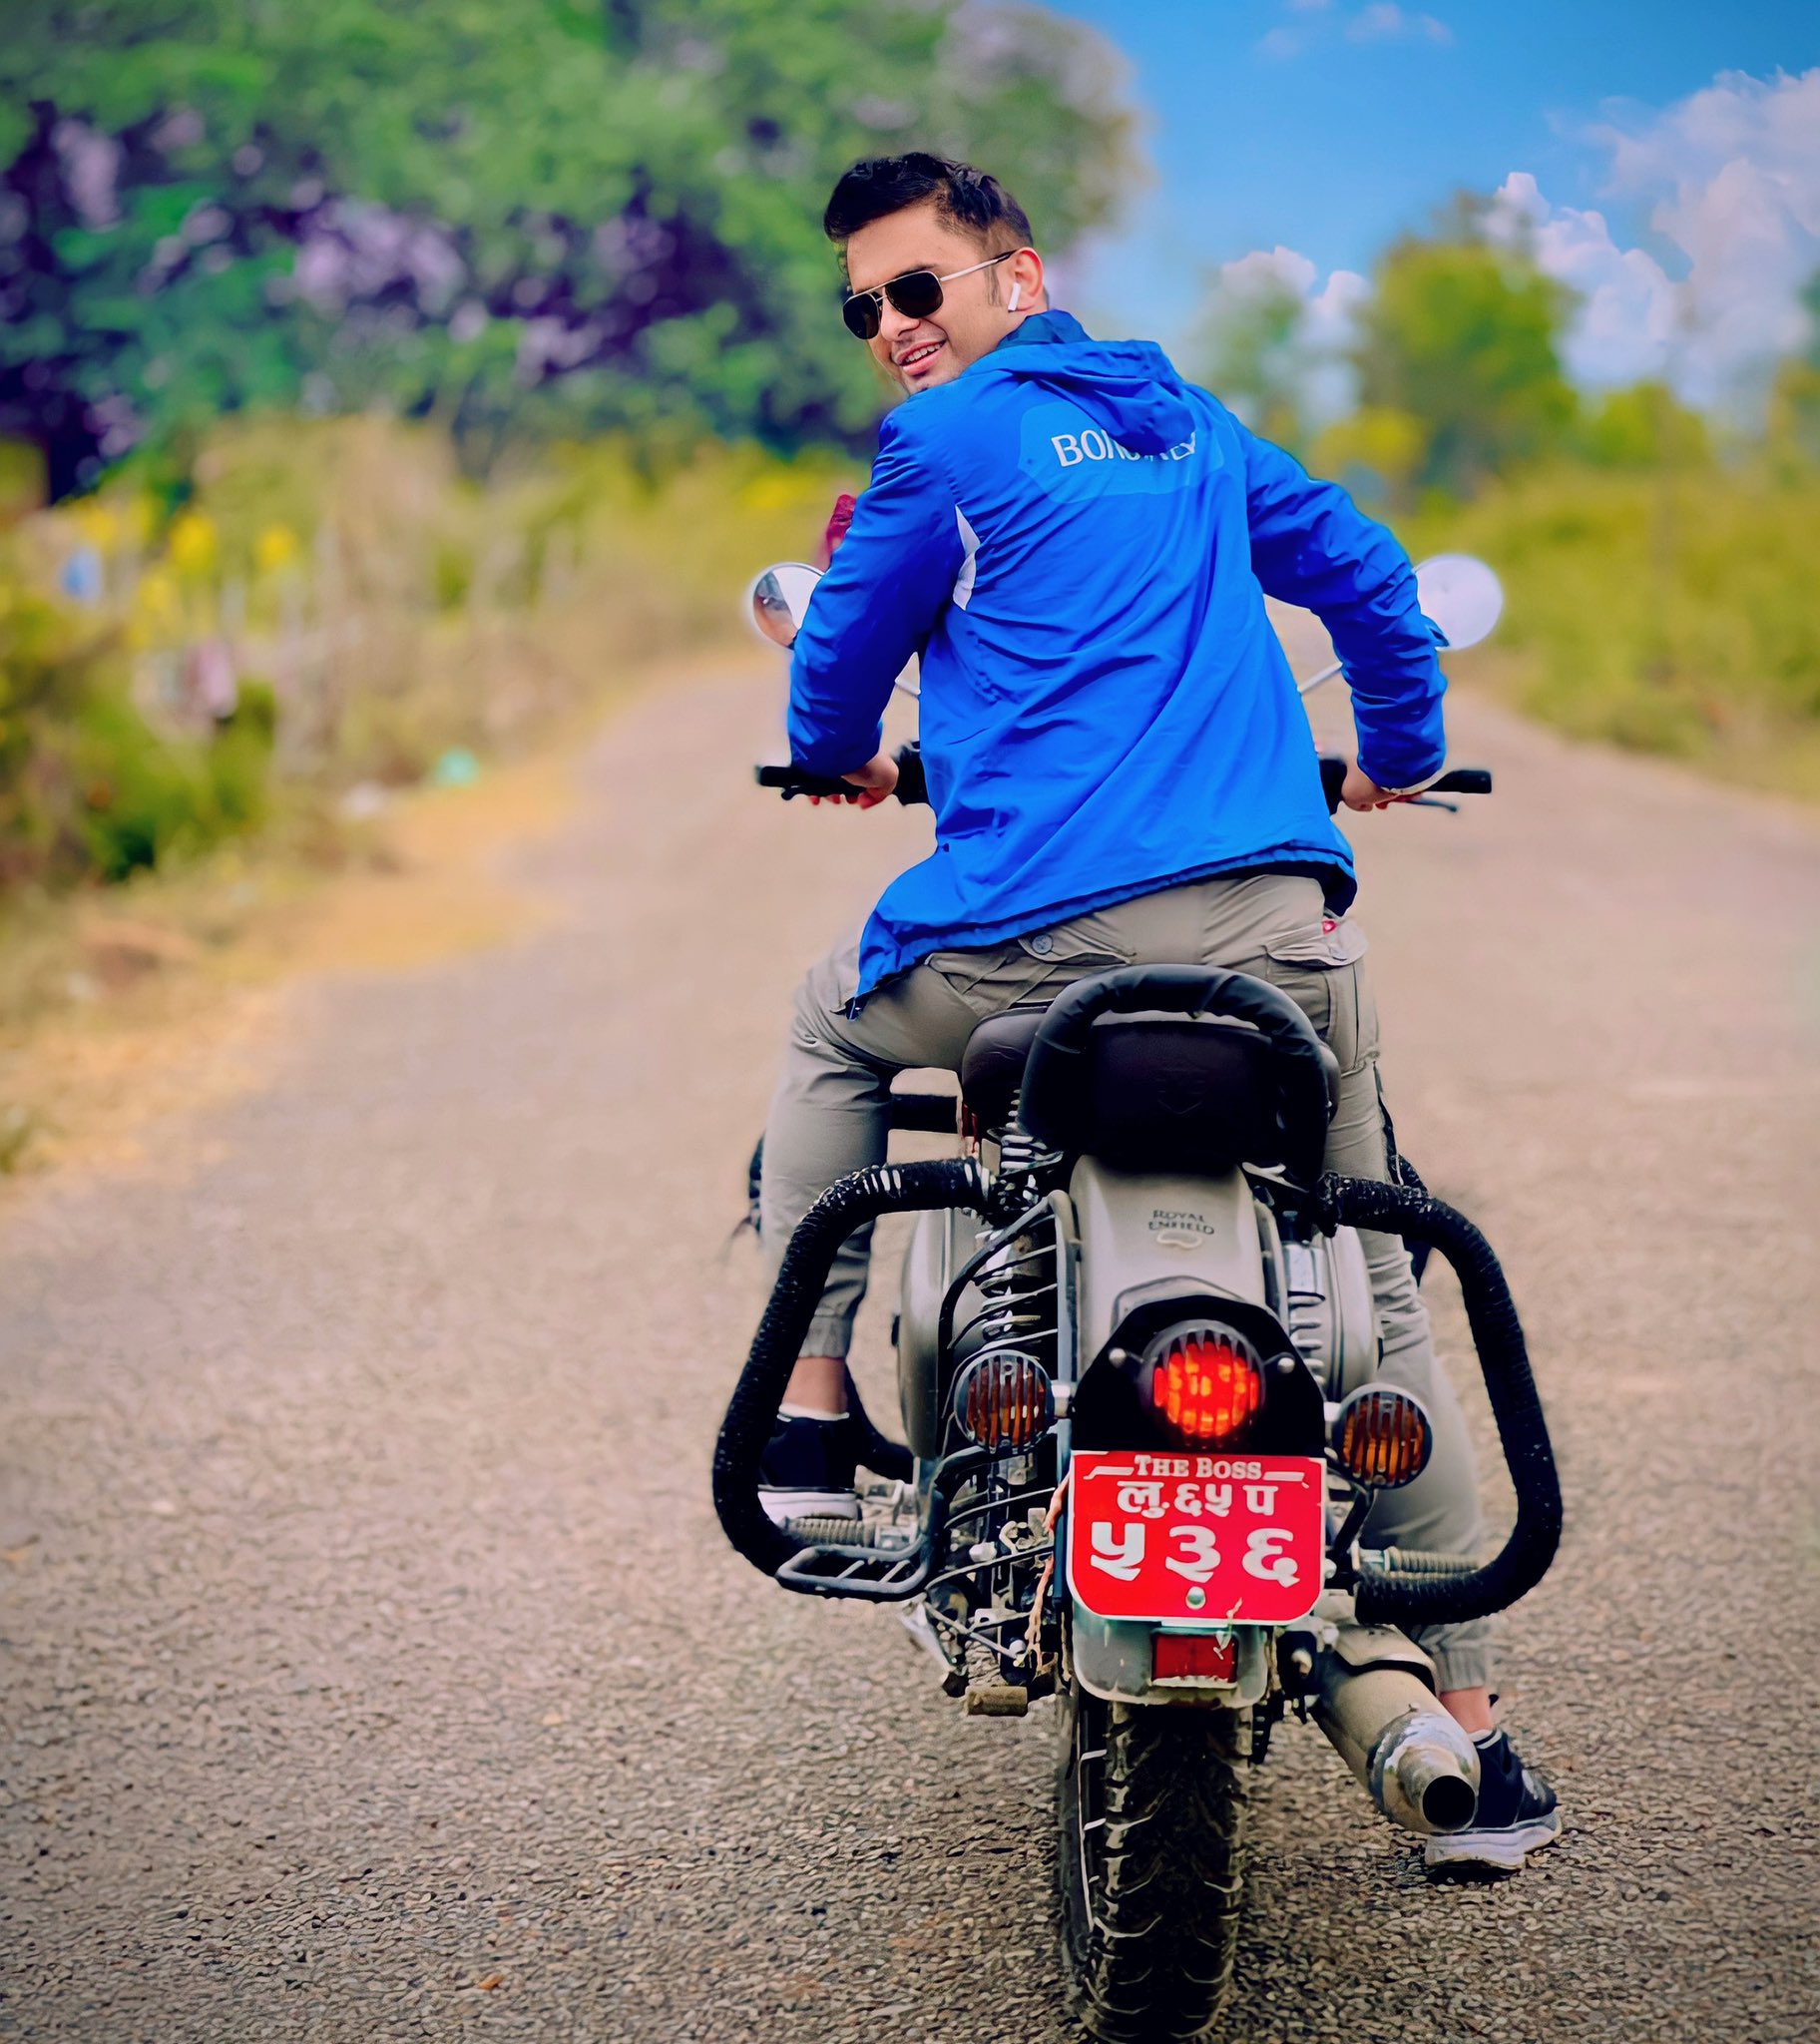 Dr Sandesh Lamsal (in Nepali: डा. सन्देश लम्साल), born on 17th August 1994, in the Dang district of Nepal, is a Nepalese internet celebrity, doctor, sportsman, social media influencer, model and social worker known for his innovative posts on different social media platforms and achievements on his social, professional & public life. Accordingto different sources, Dr Sandesh Lamsal is the First Nepalese Internet Celebrity to be verified on all social media platforms including Google, Yahoo, Bing, 𝕏, Amazon, YouTube, Telegram, TikTok, Likee, Moj, Josh, Chingari, Tiki, Huut and Vero app in 2022. He is also considered the Most Stunning Nepali Man by different news sources, on the basis of his astonishing social media posts, bold character and hot photographs found on the internet.